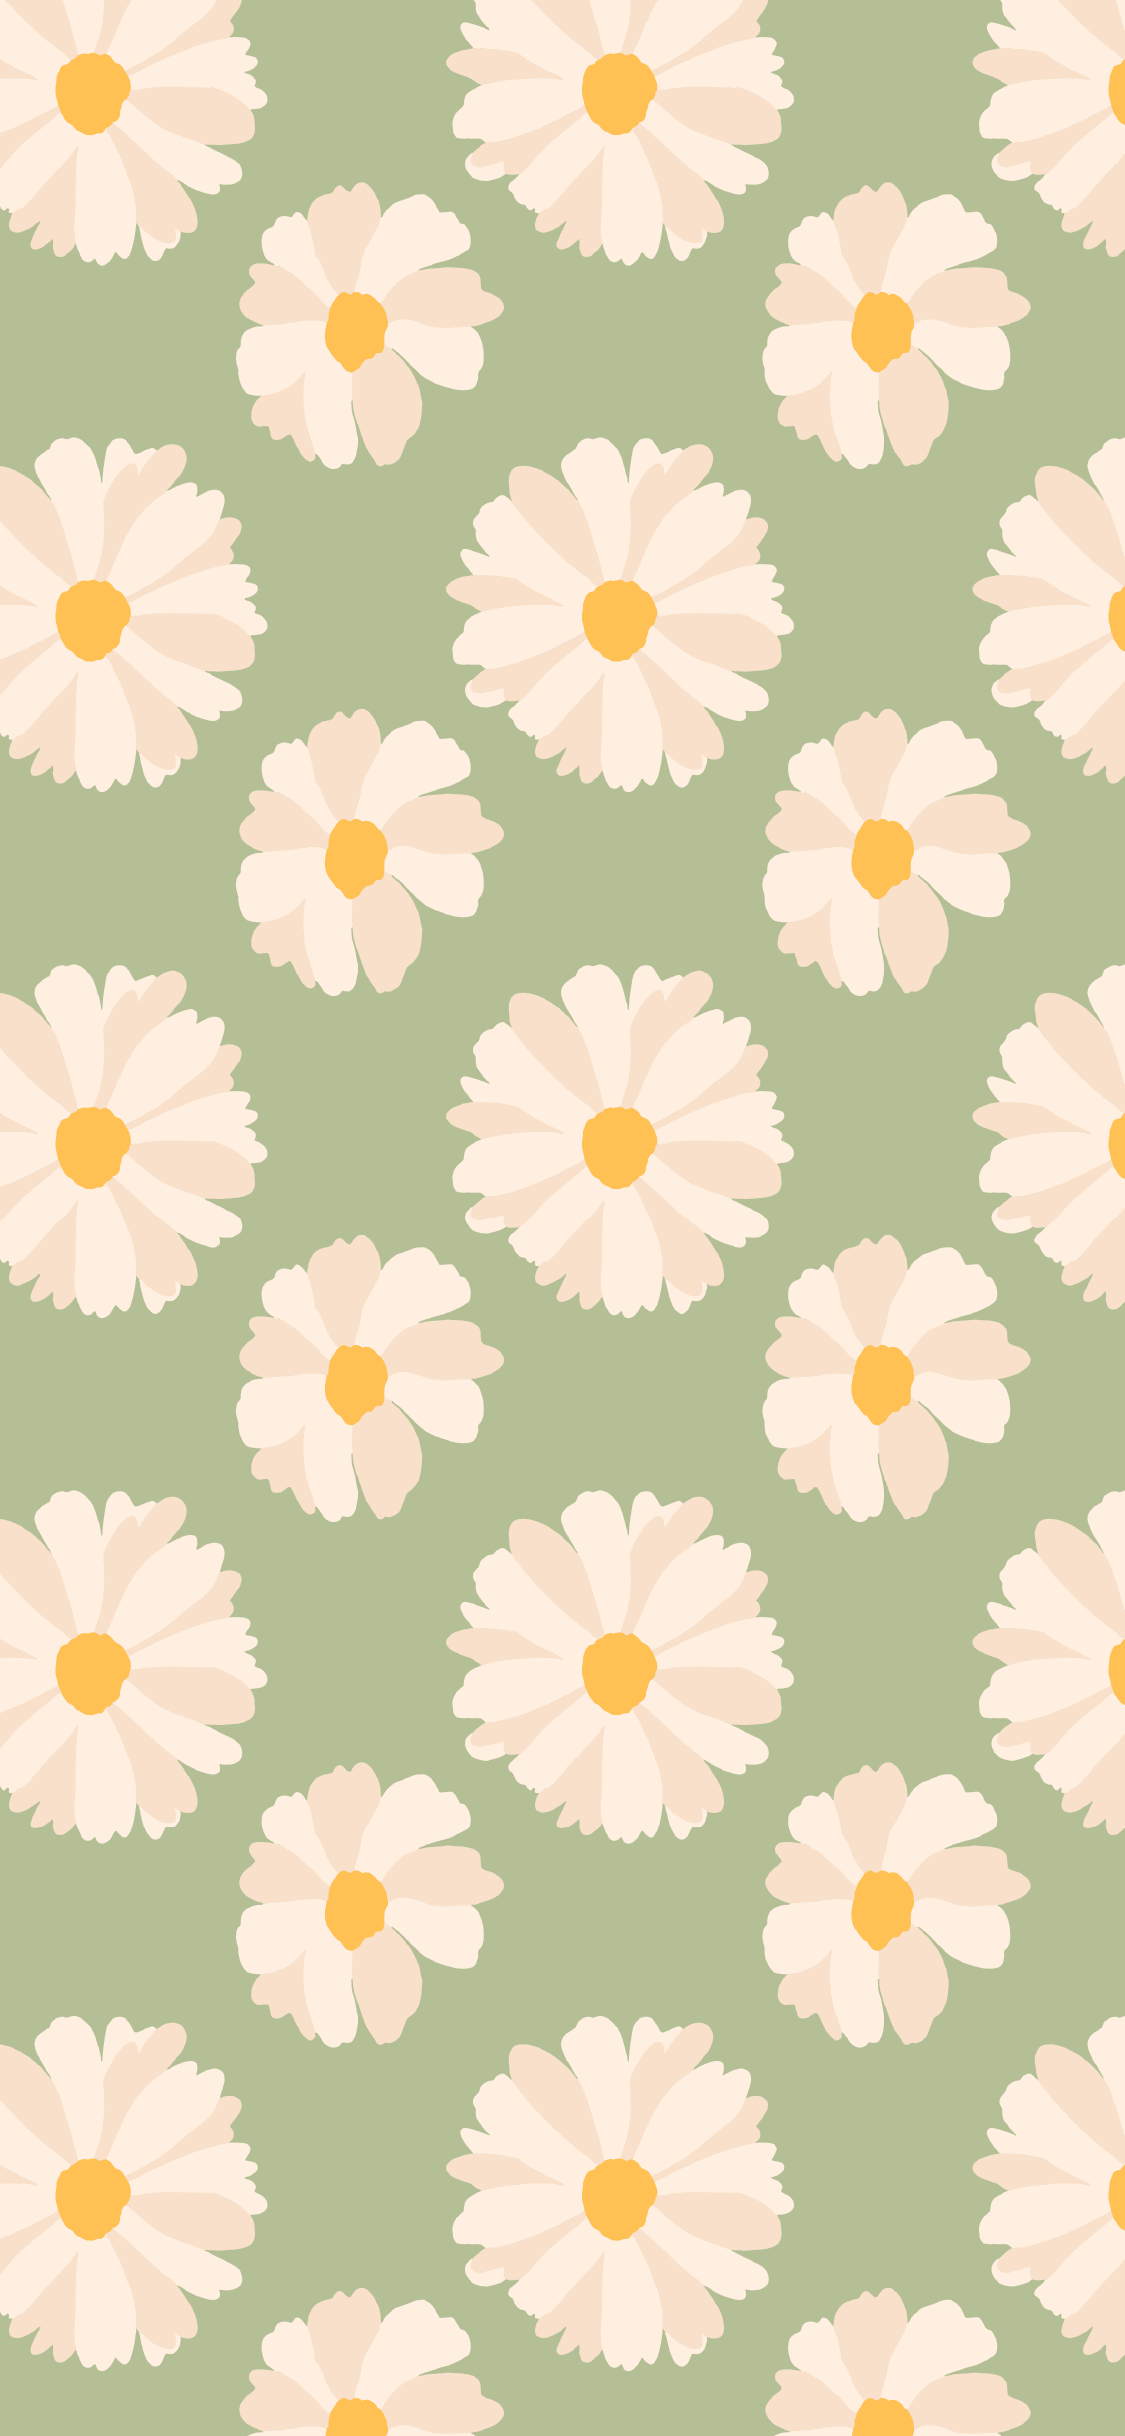 iPhone Wallpaper for Spring 2020. Simple iphone wallpaper, Floral wallpaper iphone, iPhone wallpaper green